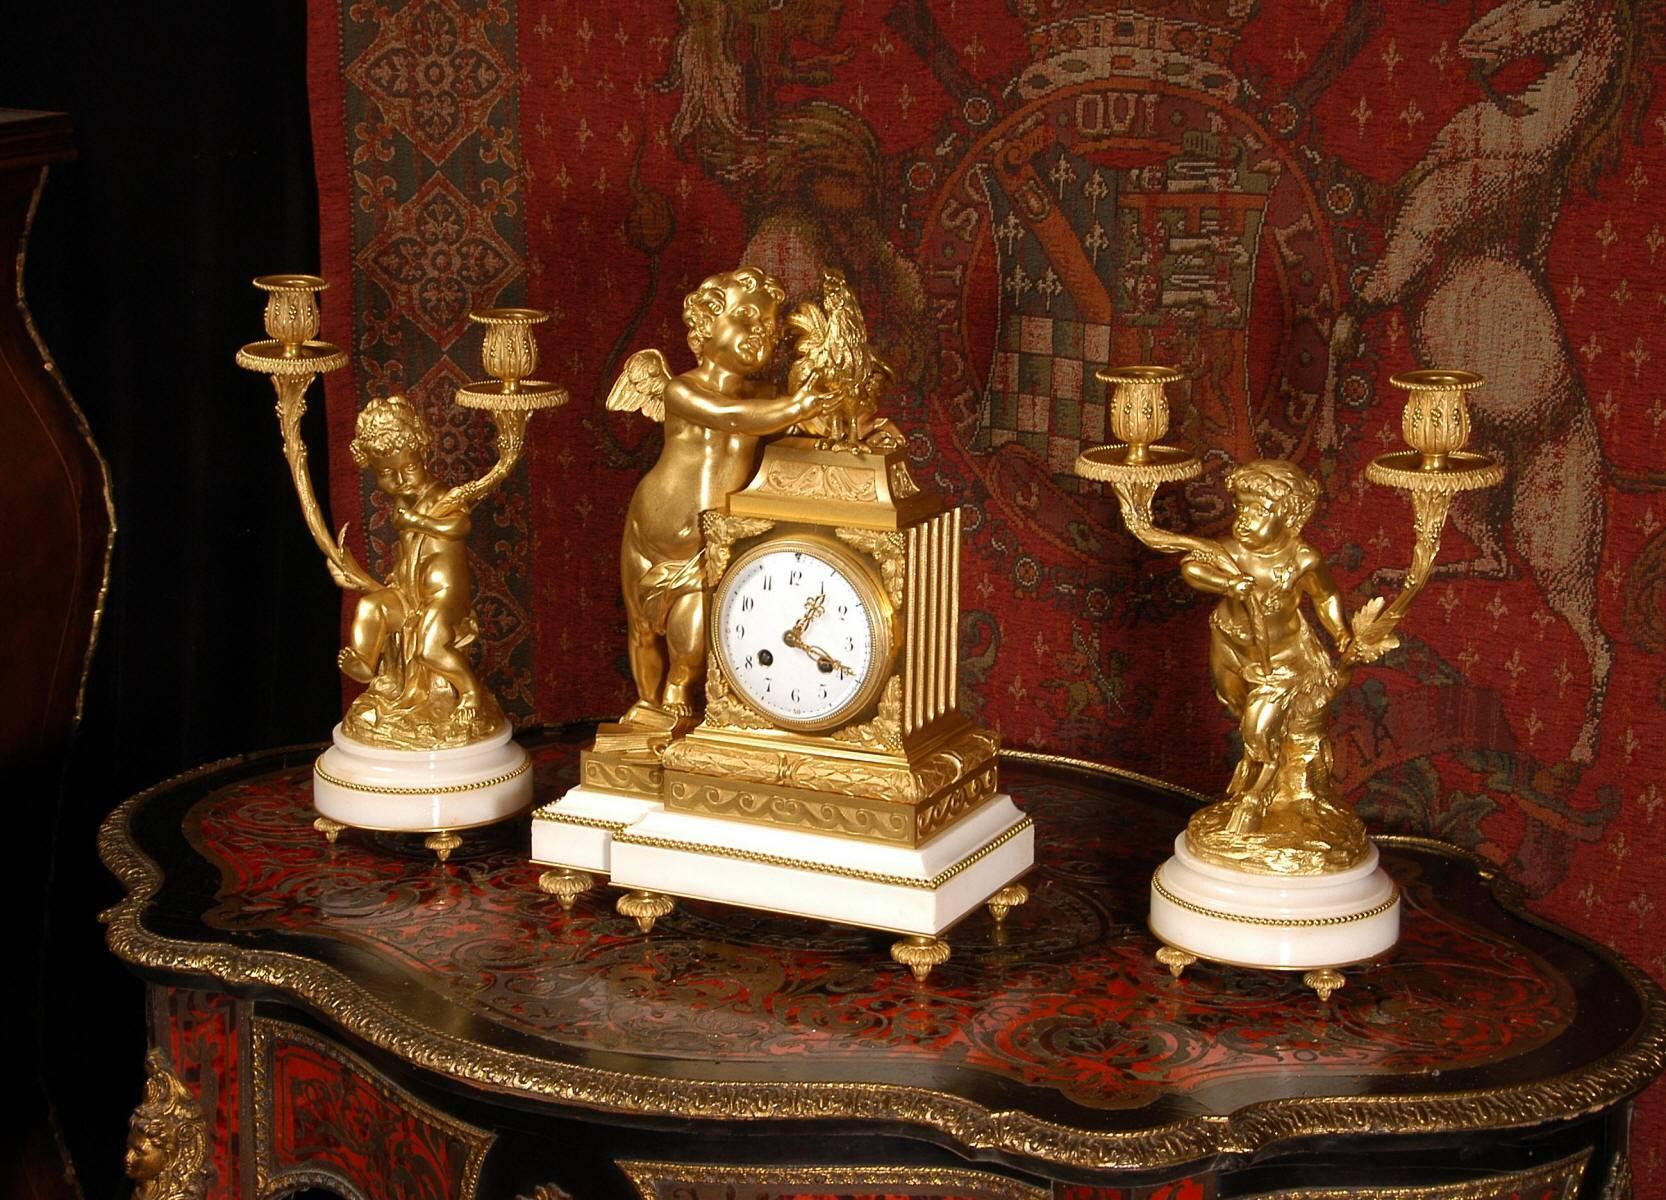 A very fine and stunning ormolu (finely gilded bronze) and white marble clock set in the Louis XVI style. Exquisitely modelled, this is a large, heavy and finely detailed set. It features a putto standing on a pile of books, playfully grabbing a